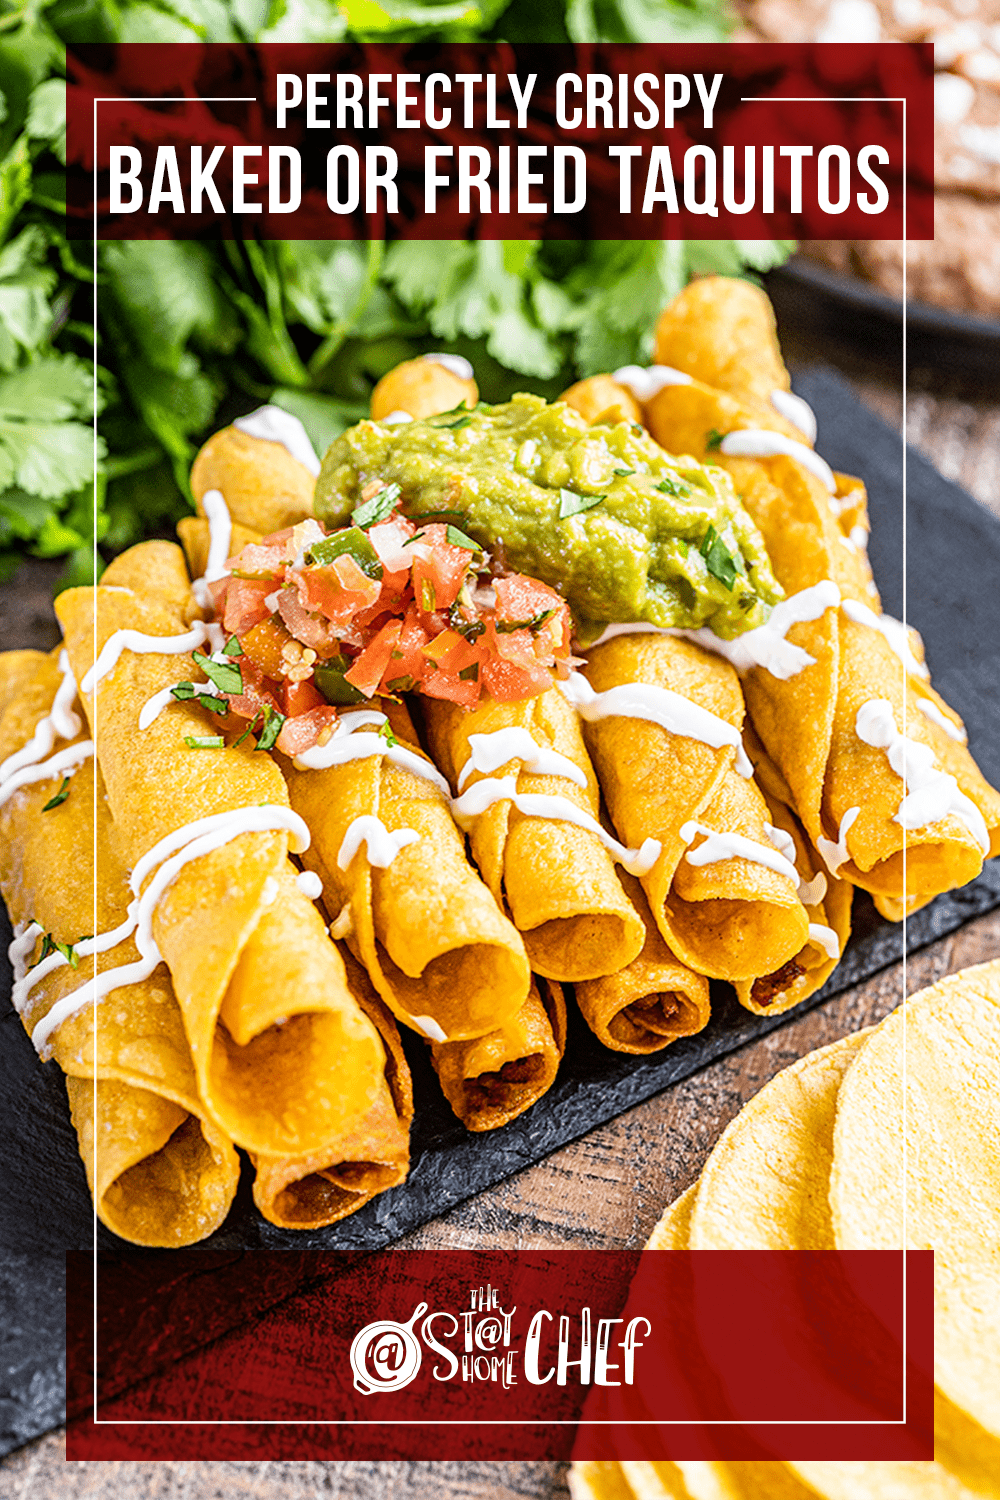 Perfectly Crispy Baked or Fried Taquitos